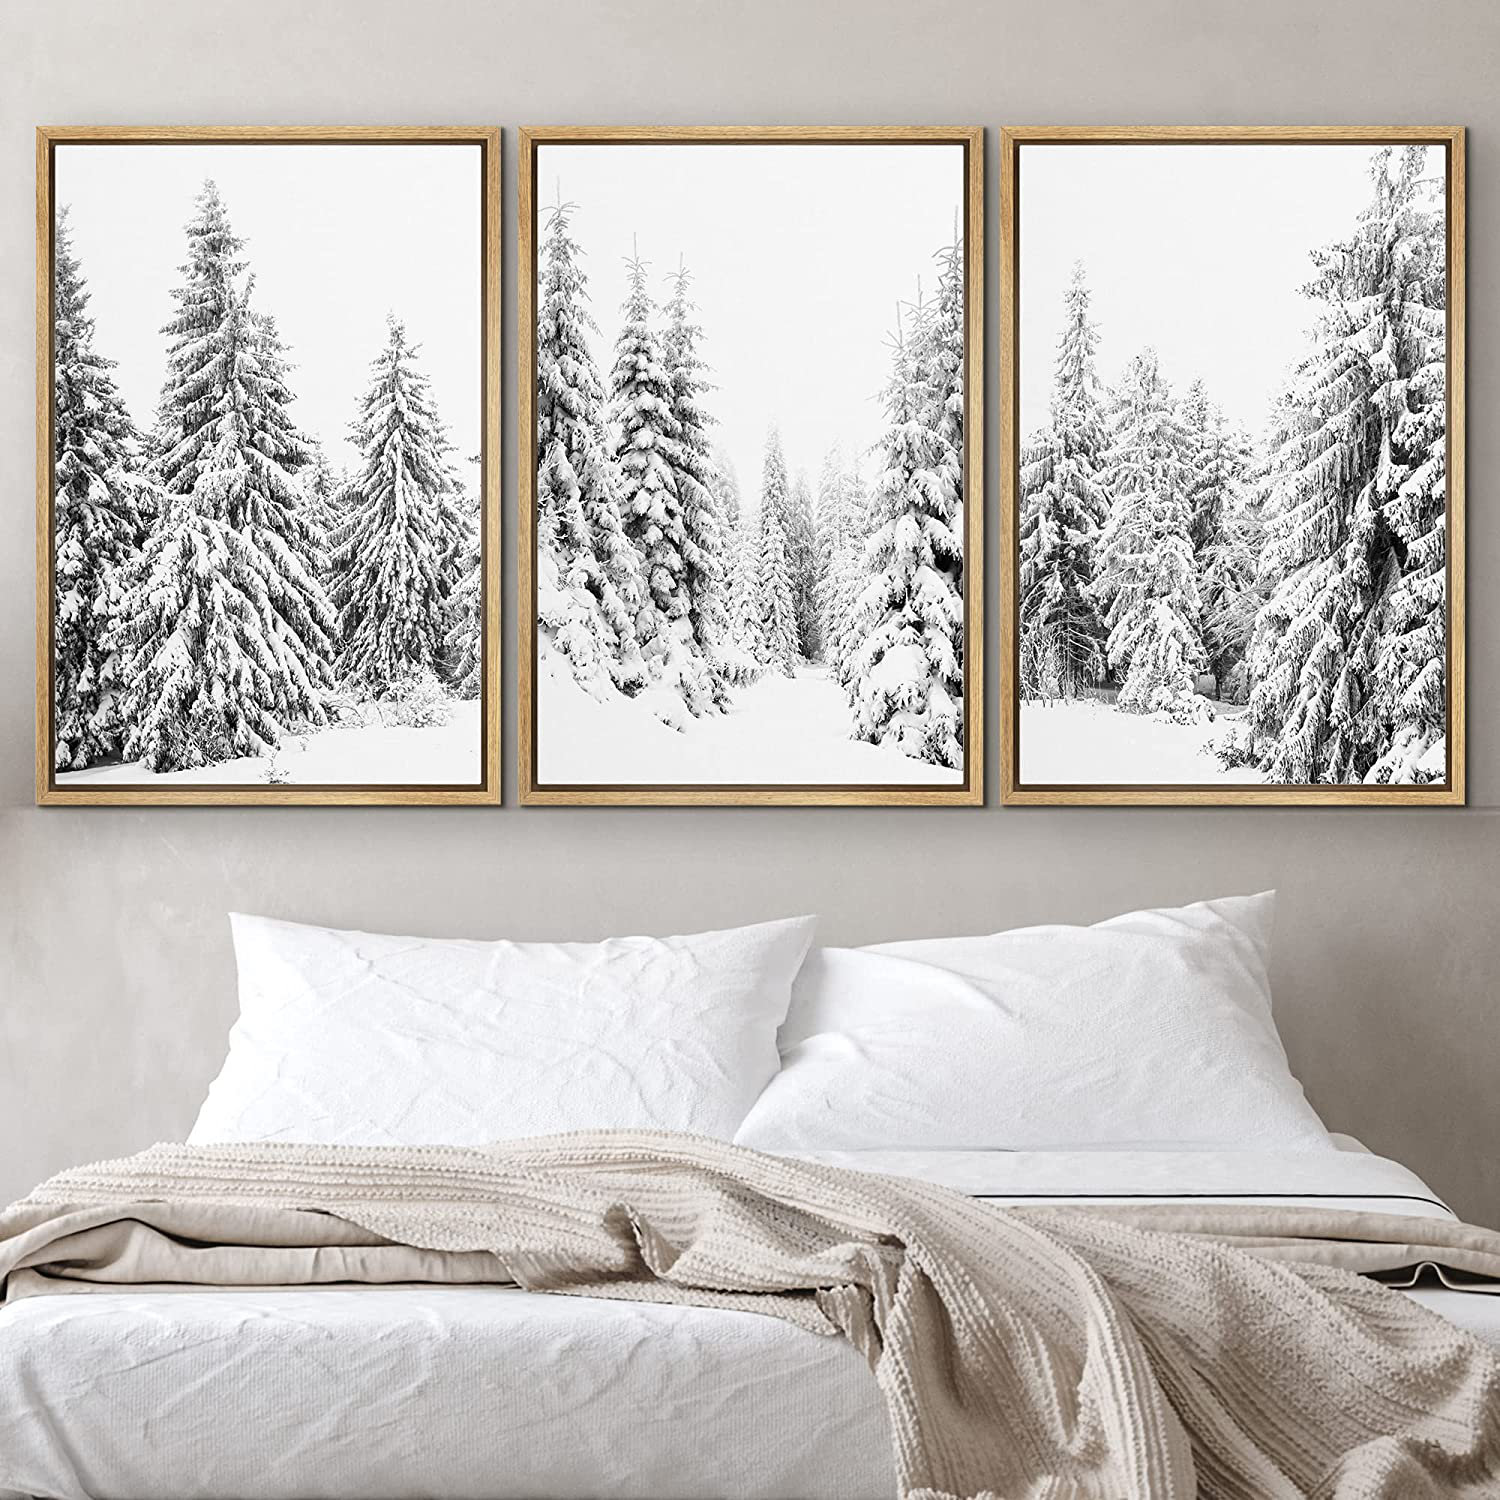 Creative Products Doe Walking in The Snow 30 x 40 Canvas Wall Art, Blue